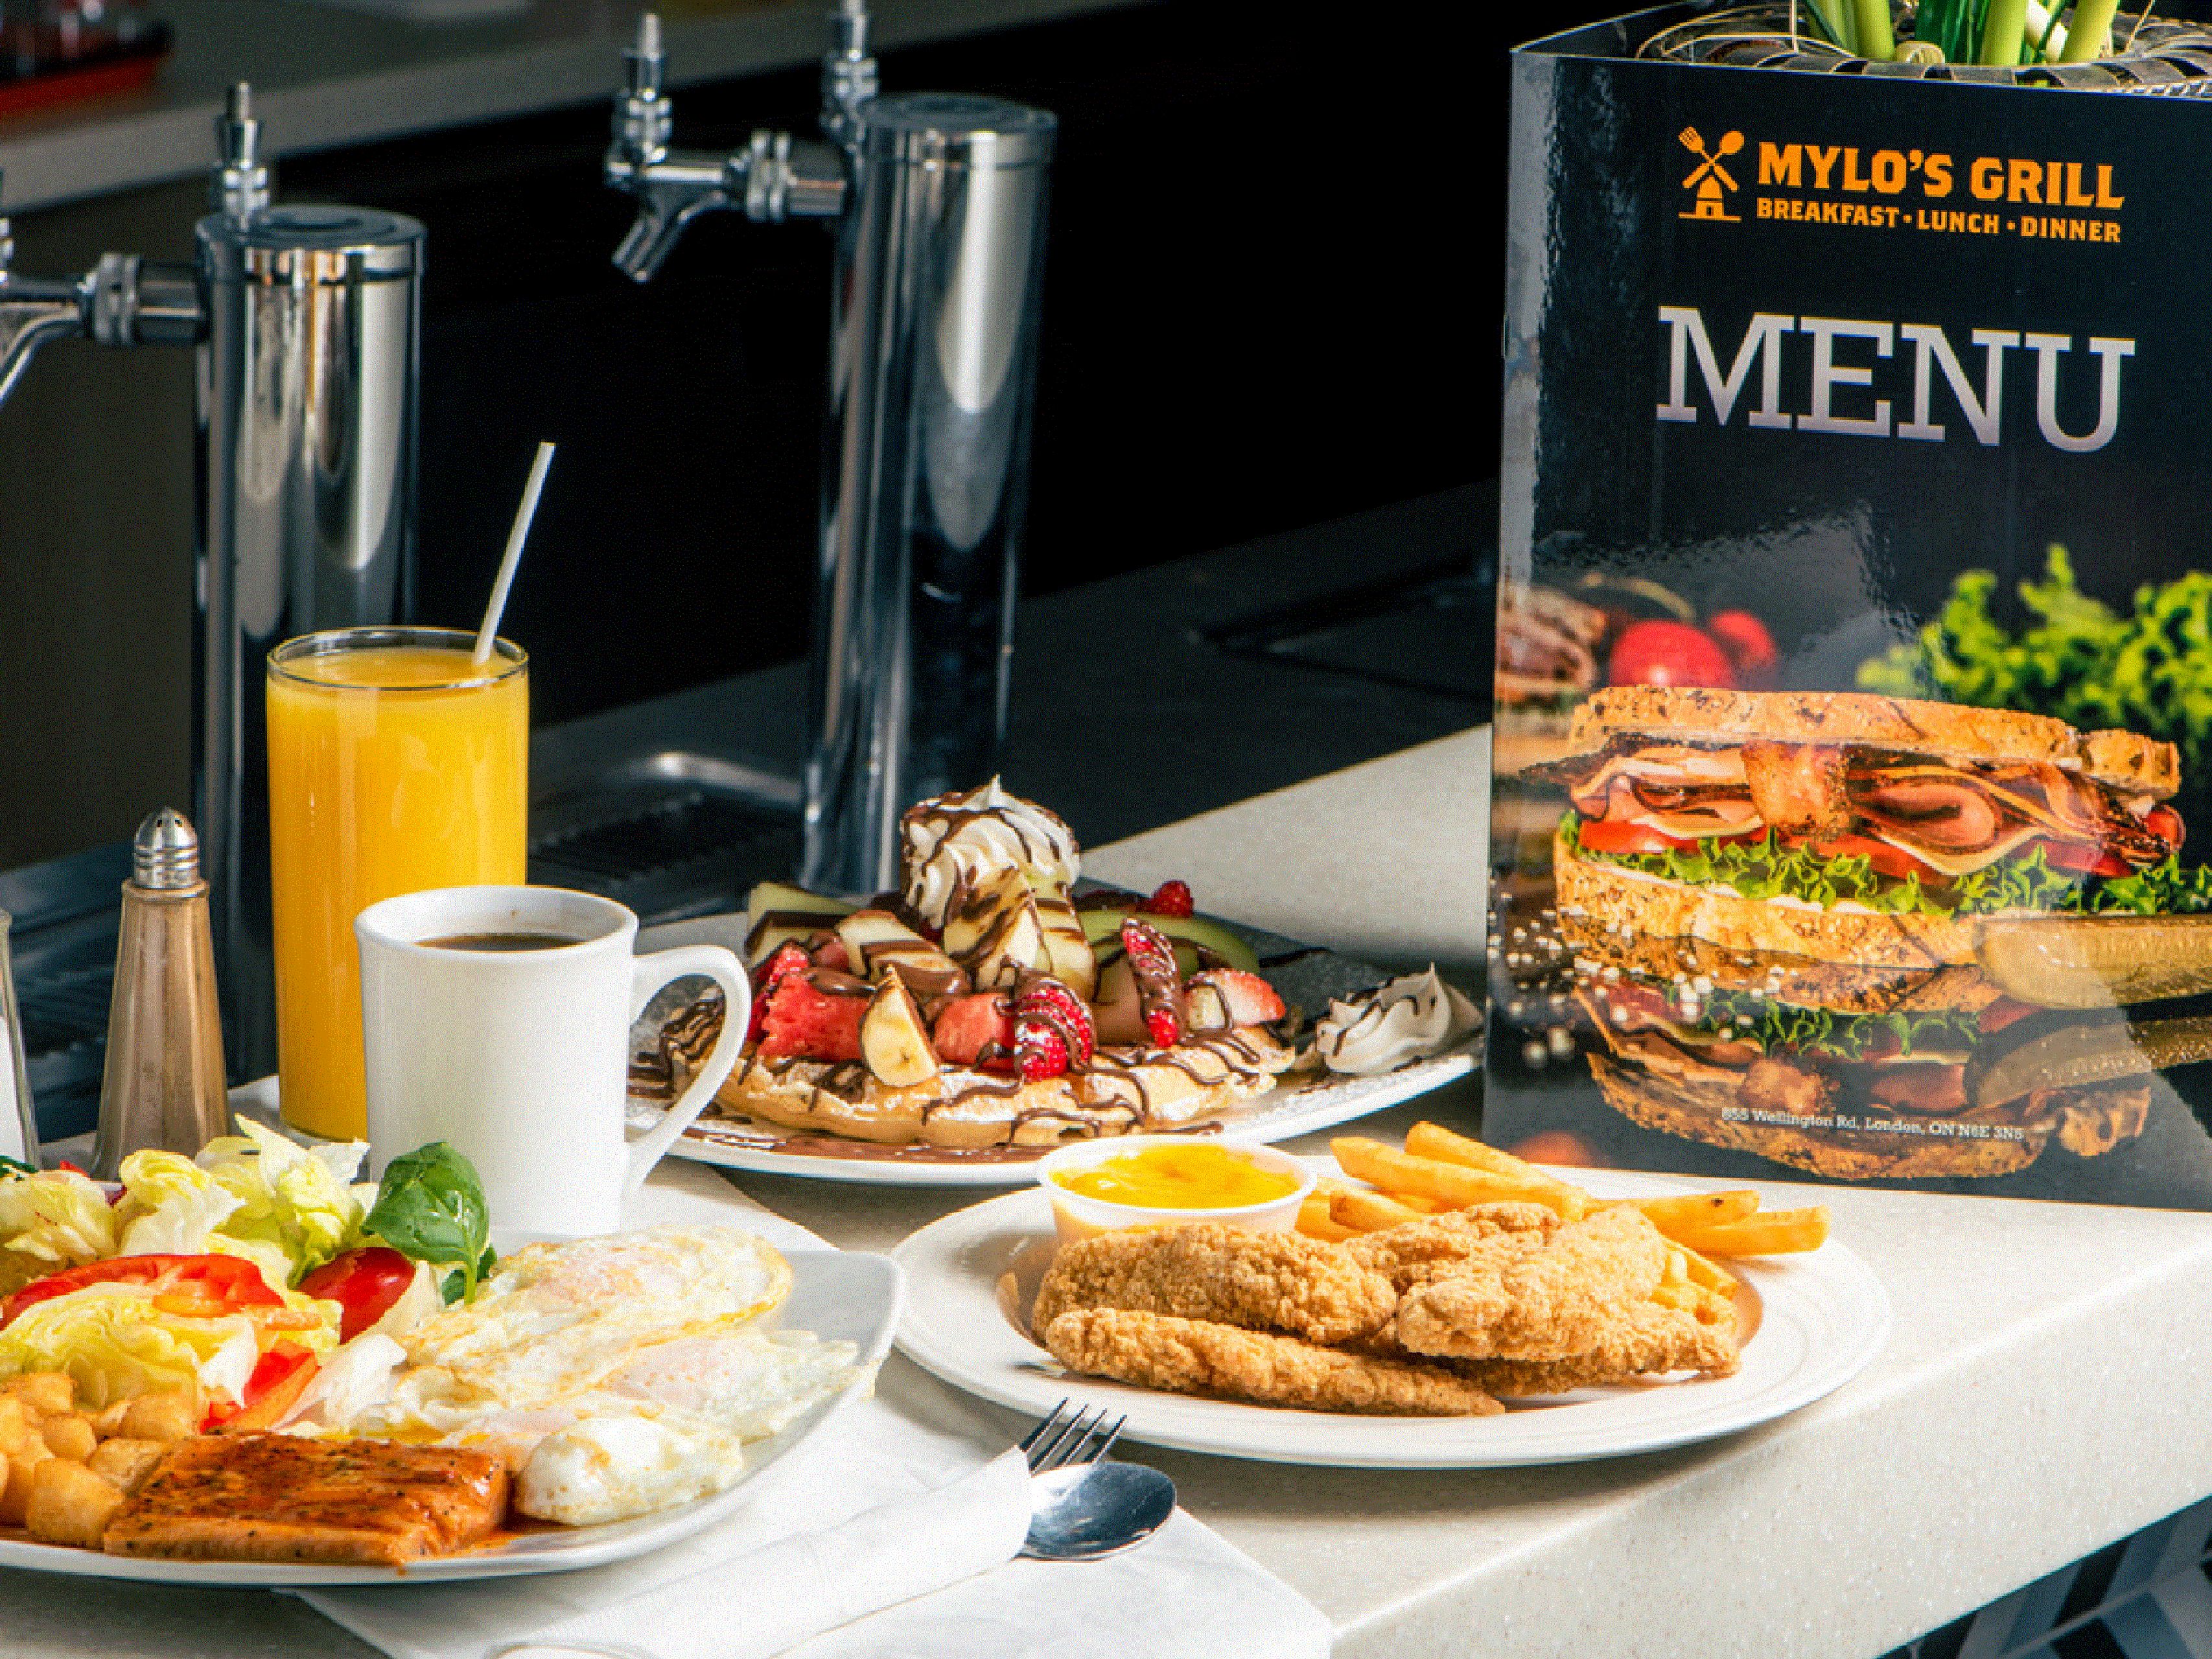 Mylo's is attached to the hotels and offers casual dinning for families and groups. Come and join us for Breakfast and Dinner! Hours of Operation - 6.30AM to 2PM. 4PM to 8PM Your table awaits!